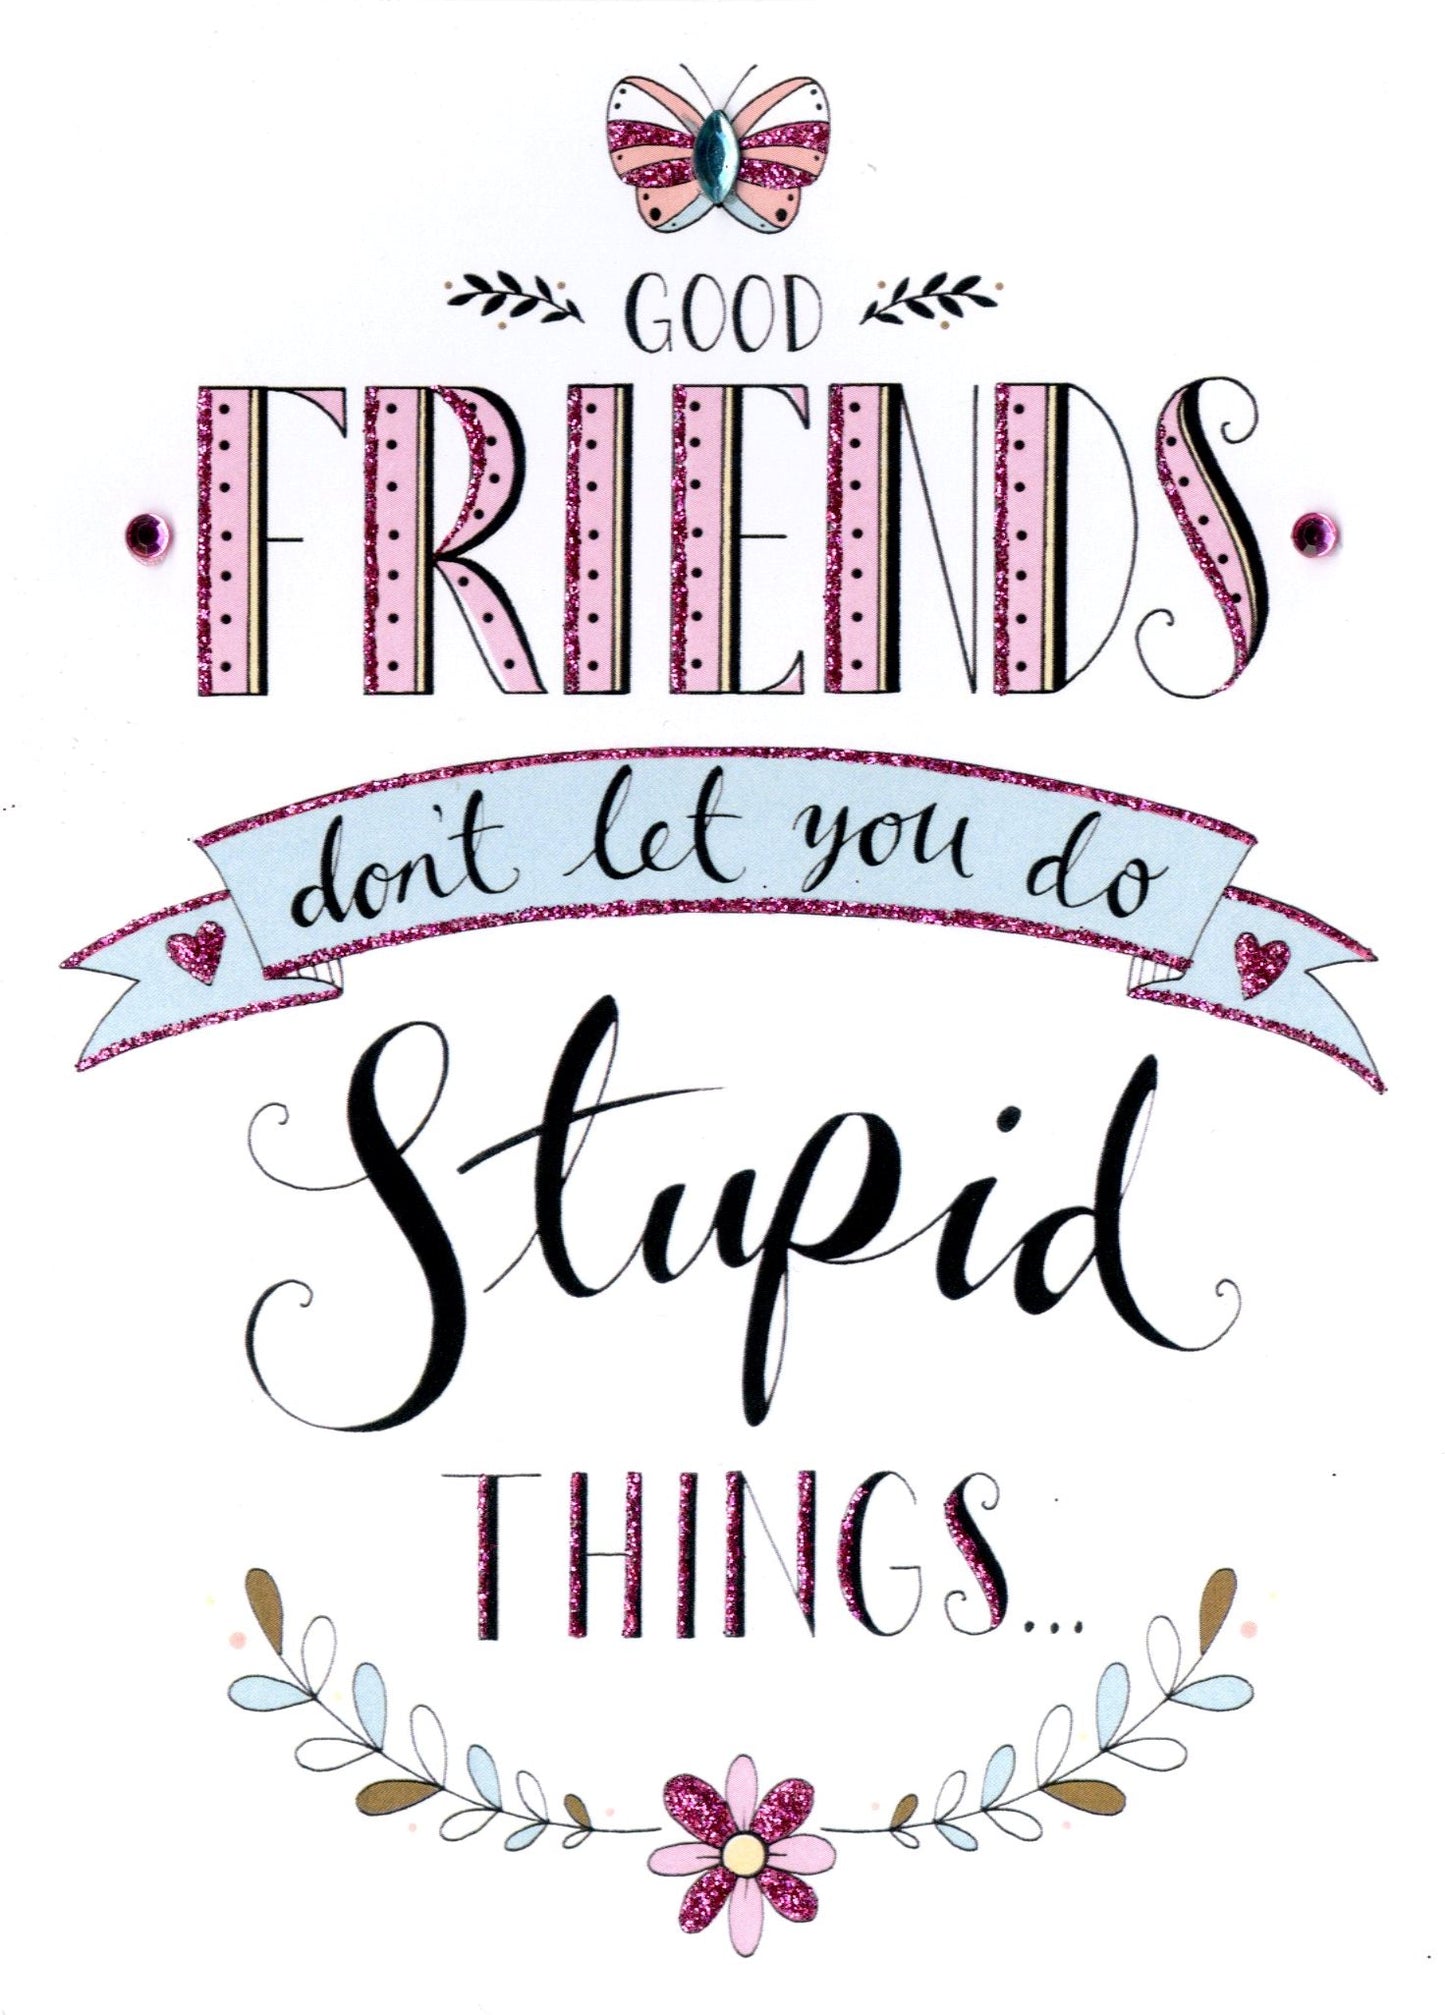 Good Friends Stupid Things Greeting Card